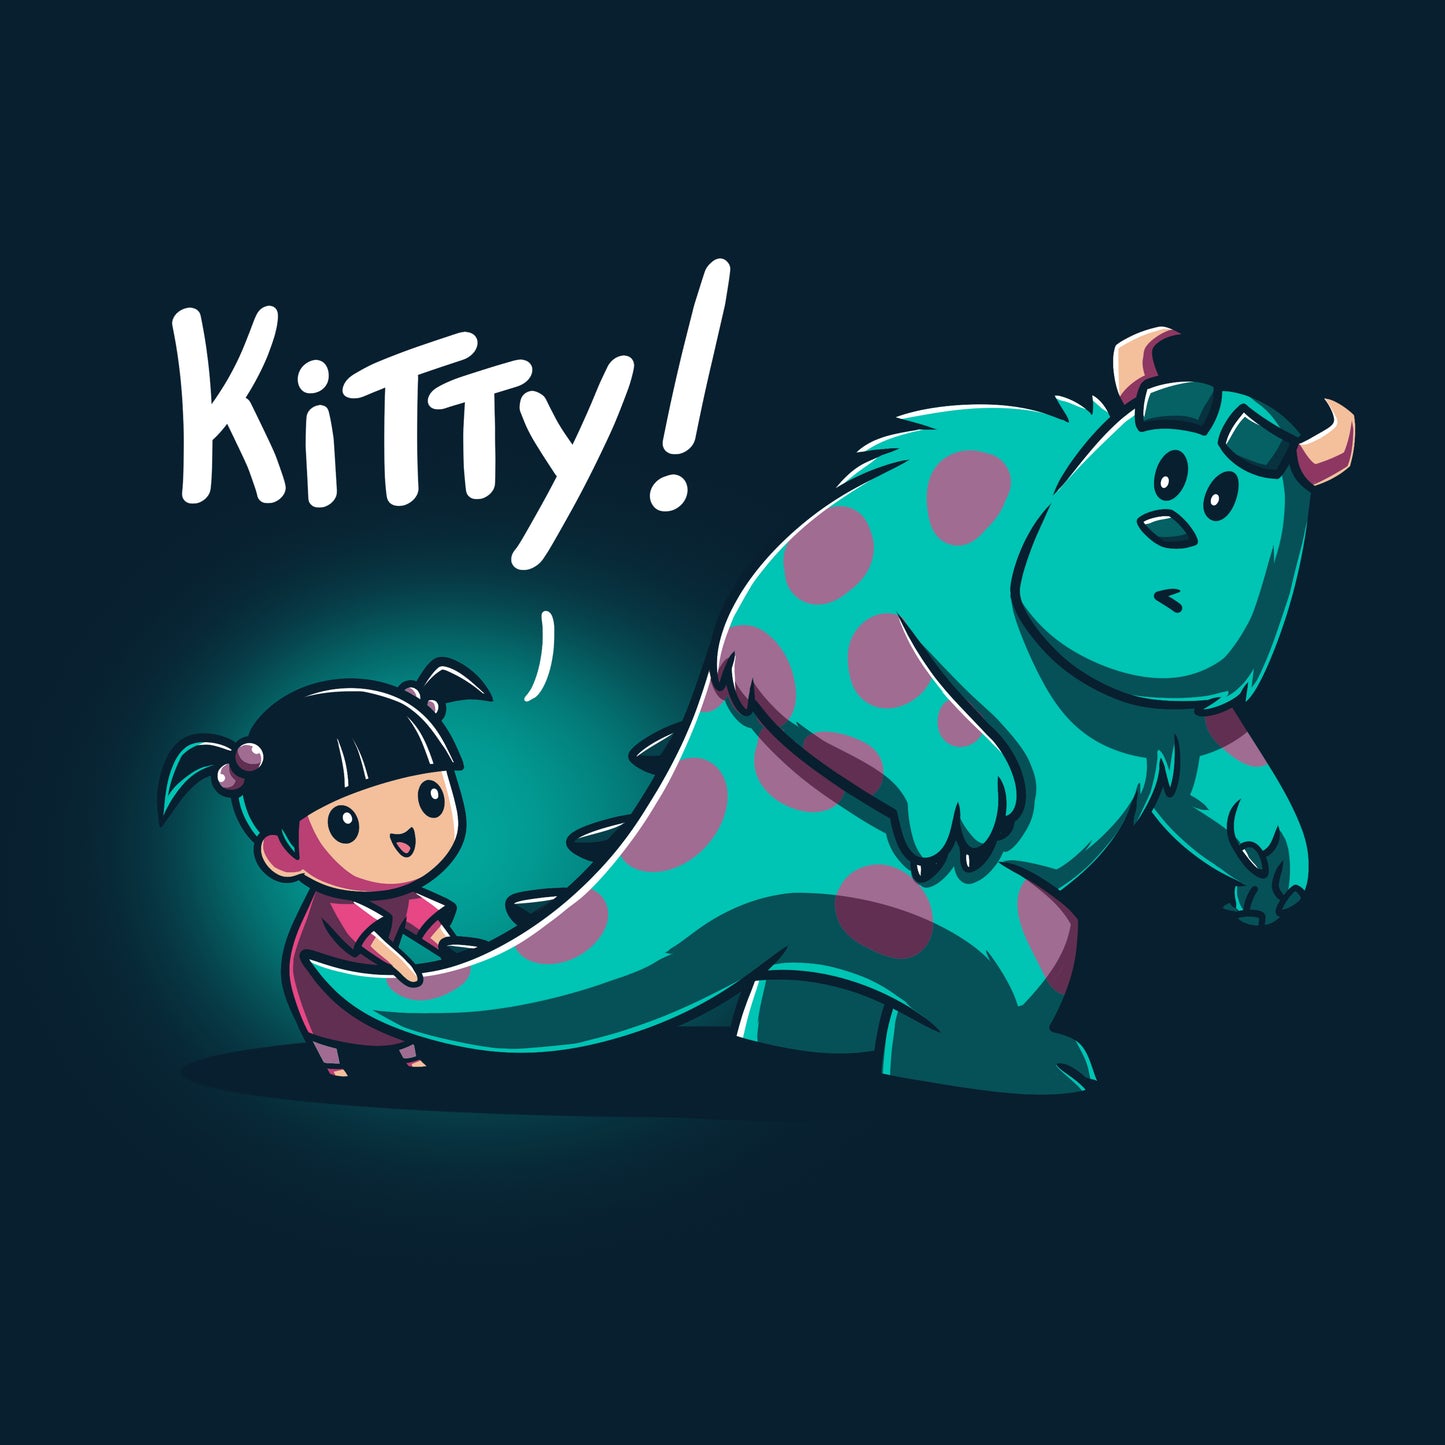 An officially licensed Disney image of a girl and a monster from Monster's Inc with the words Boo's Kitty.